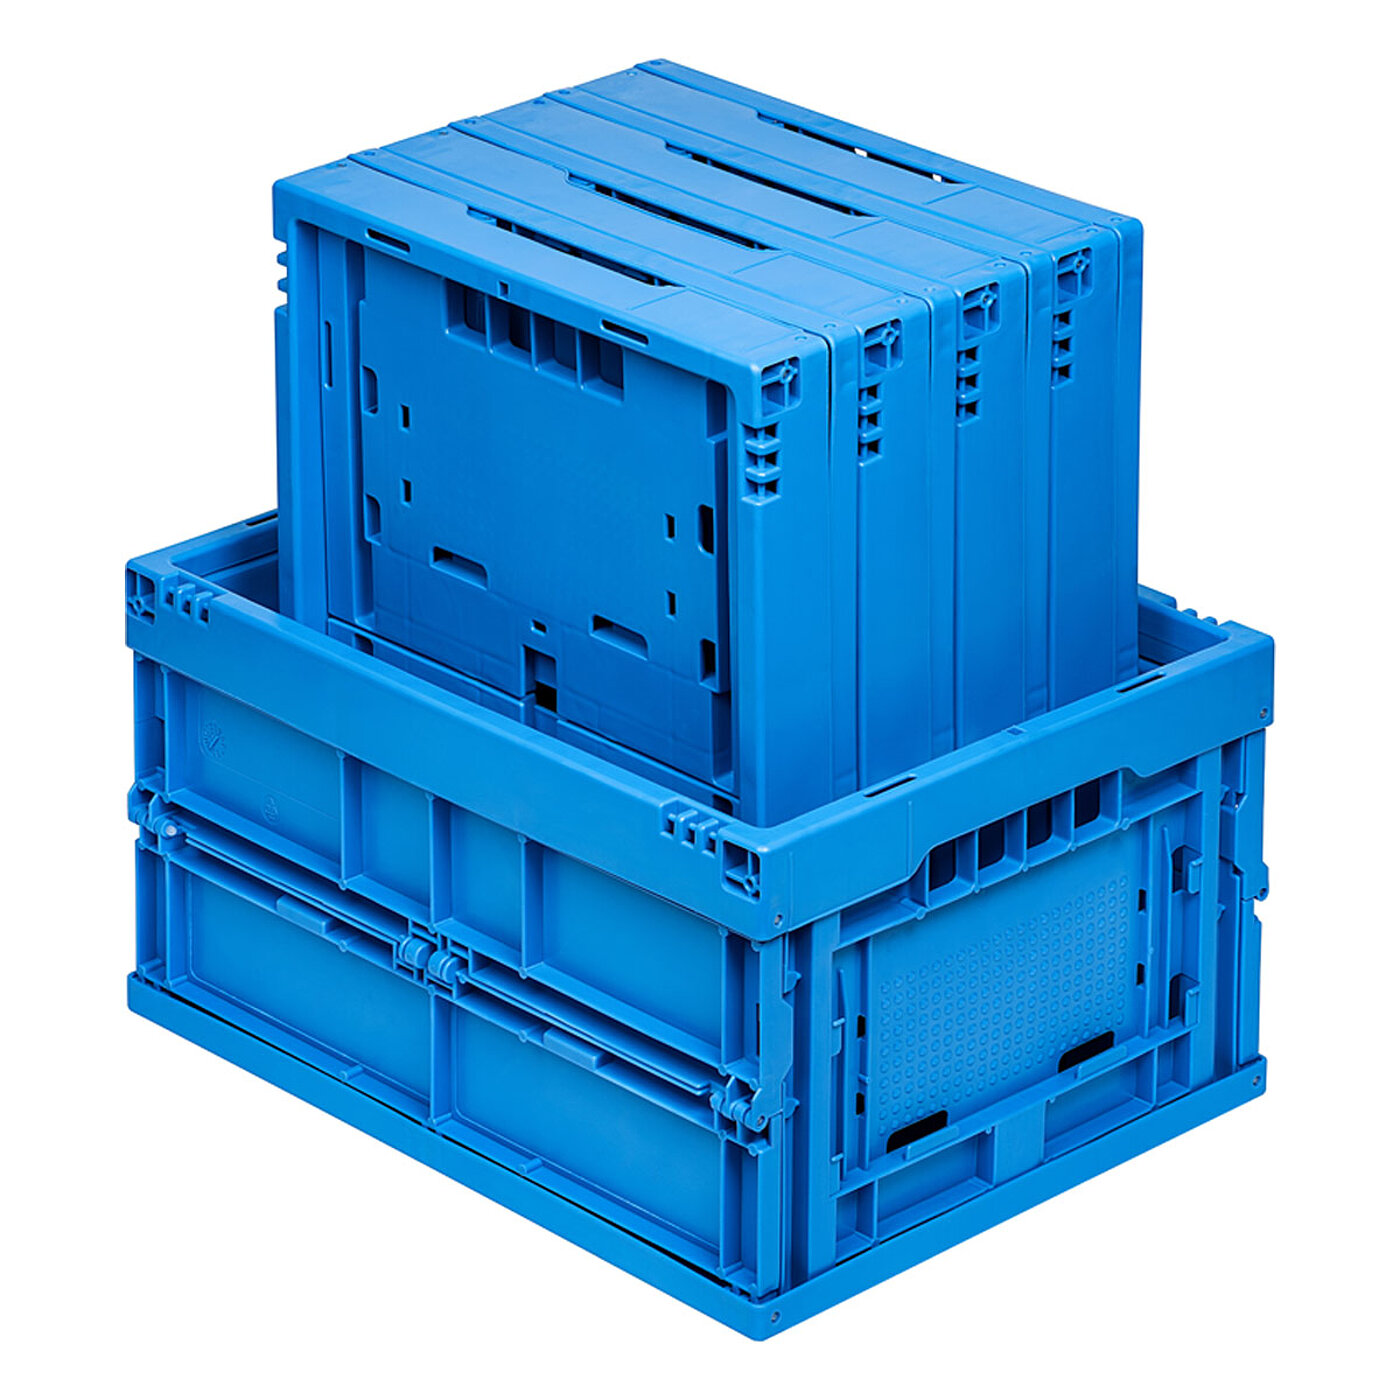 a blue foldable box made of plastics, in view from askew, in which four fully collapsed foldable boxes stand upright, isolated on white background
